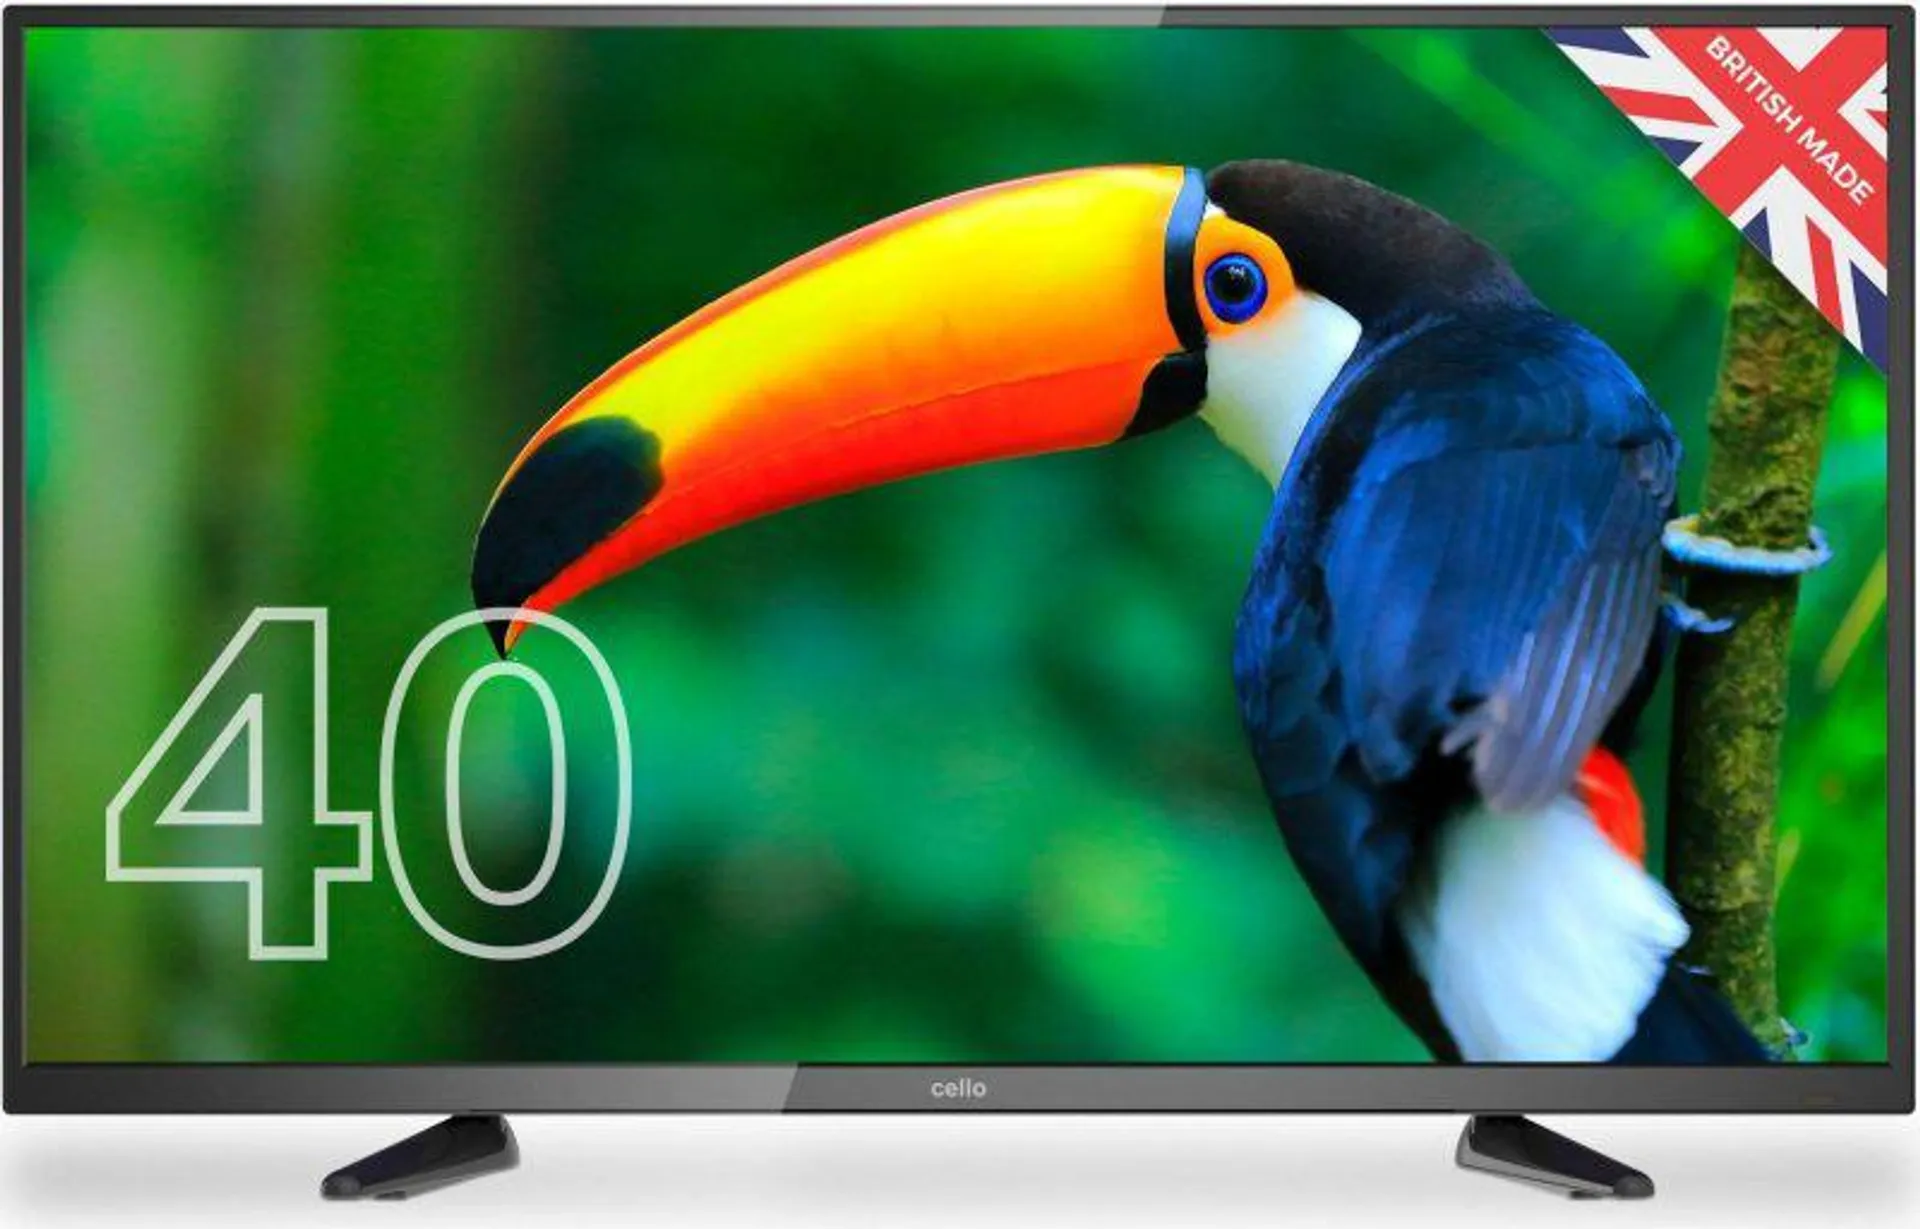 EXDISPLAY Cello C4020DVBT2 40" Full HD TV with Freeview T2 HD and Digital Freeview Channels